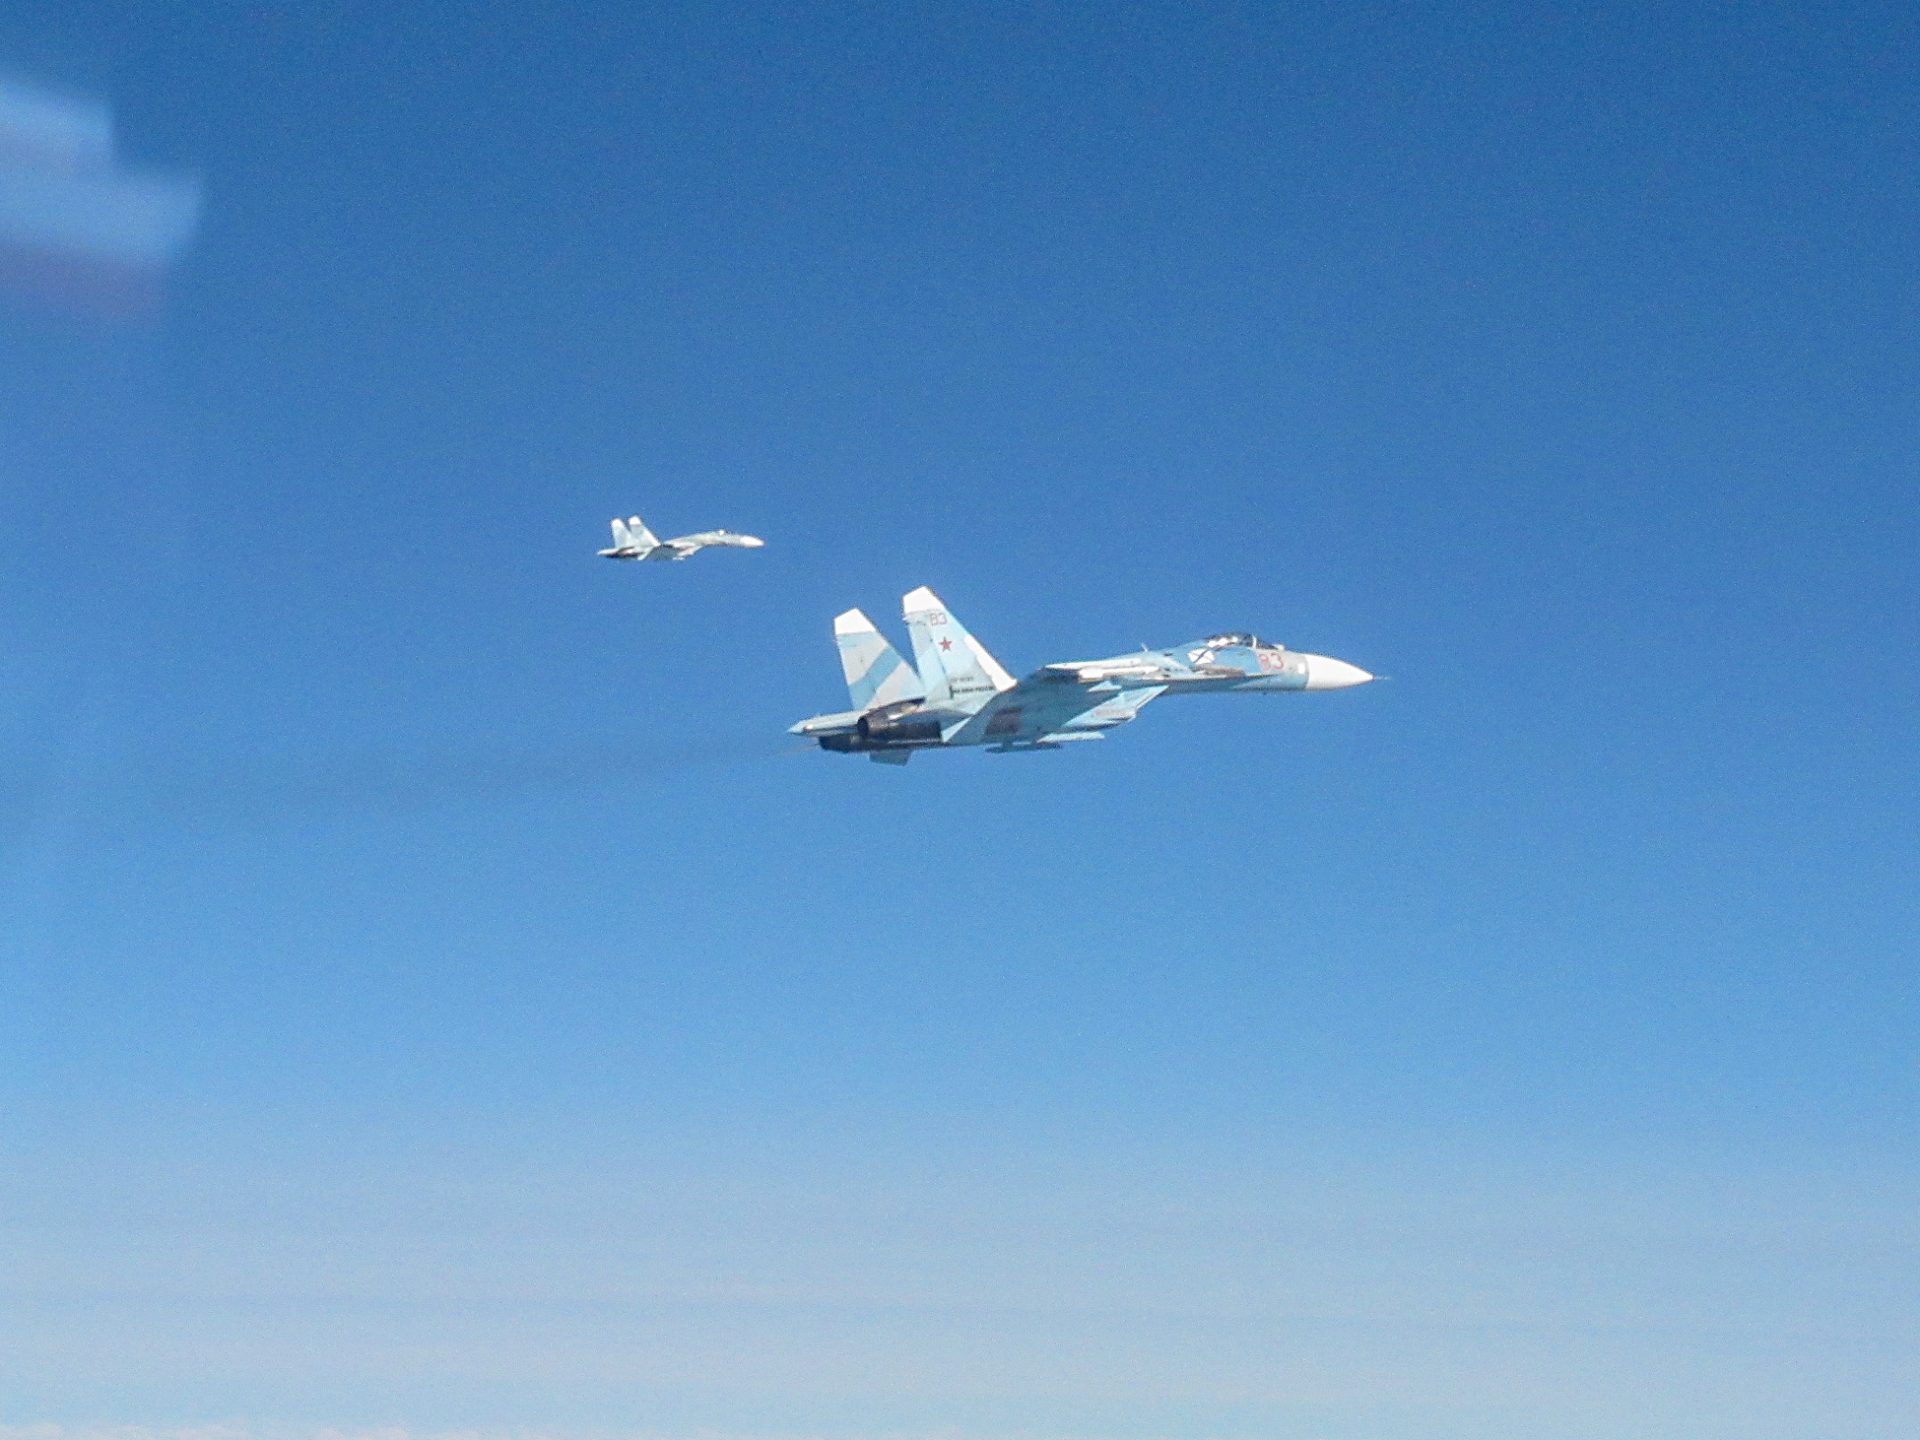 Heartstopping moment Putin's 'Doomsday Plane' on mystery mission is intercepted by RAF Typhoons in swoop on NATO border